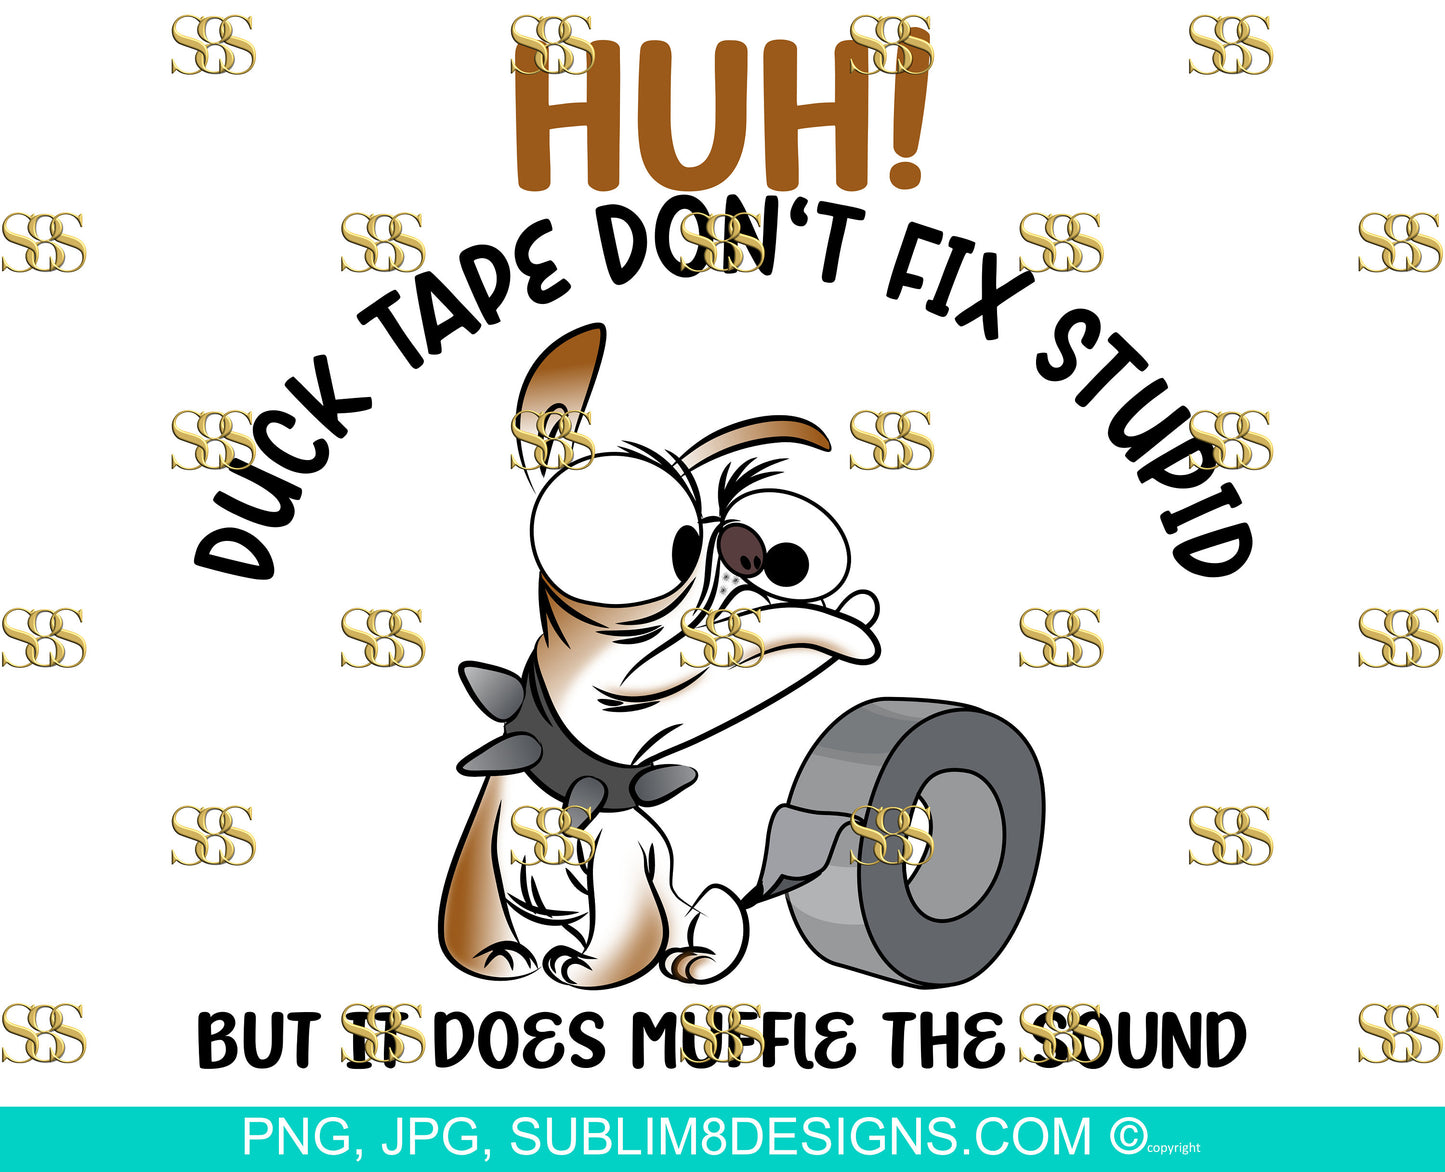 Huh! Duck Tape Don't Fix Stupid, But It Does Muffle The Sound | Dog Design | Dog Gifts | Bulldog svg | Sublimation Design PNG and JPG ONLY